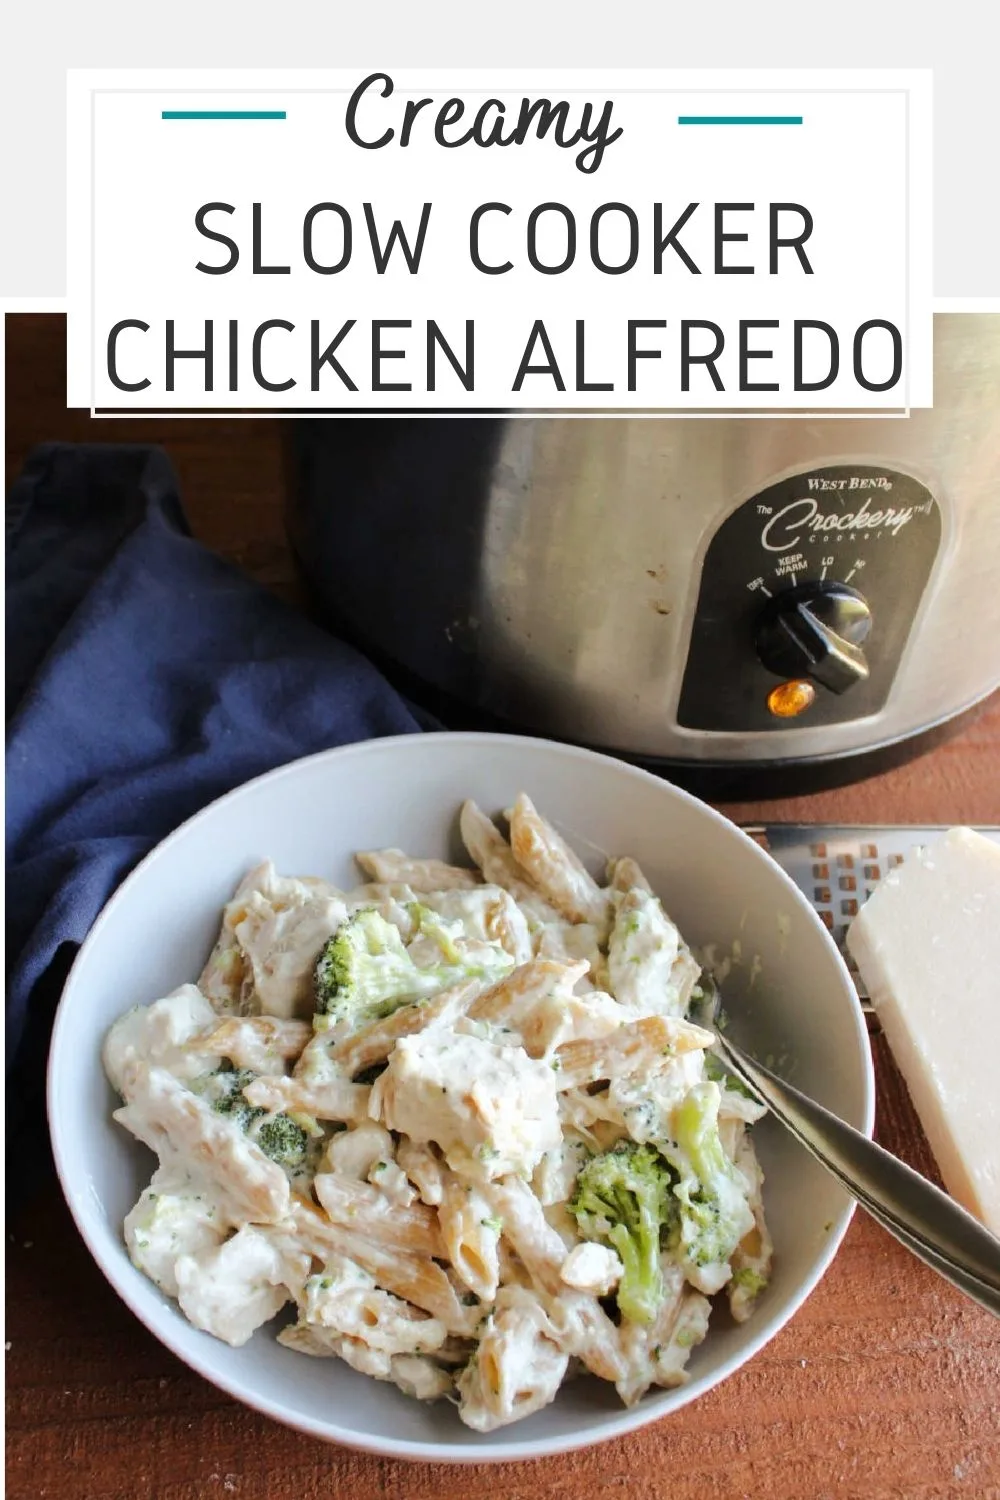 If rich creamy alfredo is a favorite at your house, you are going to love this slow cooker chicken alfredo with pasta and broccoli. The prep work is almost non-existent and dinner cooks while you go about your life.